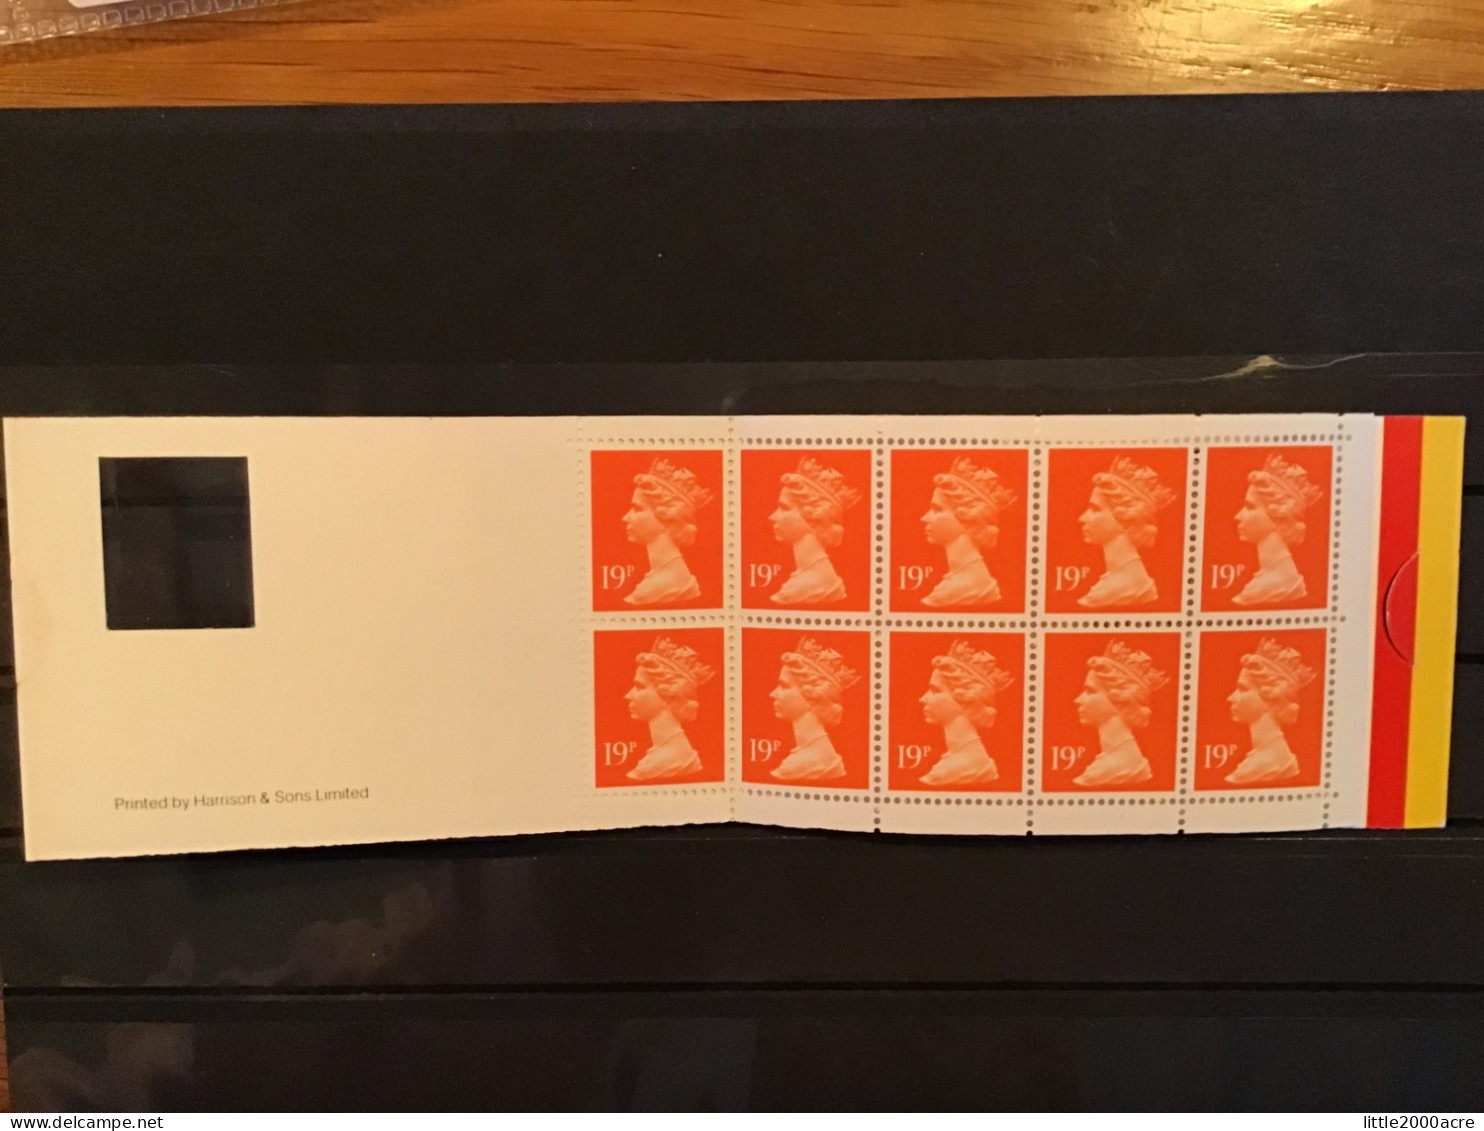 GB 1988 10 19p Stamps (code M) Barcode Booklet £1.90 MNH SG GP1 - Carnets